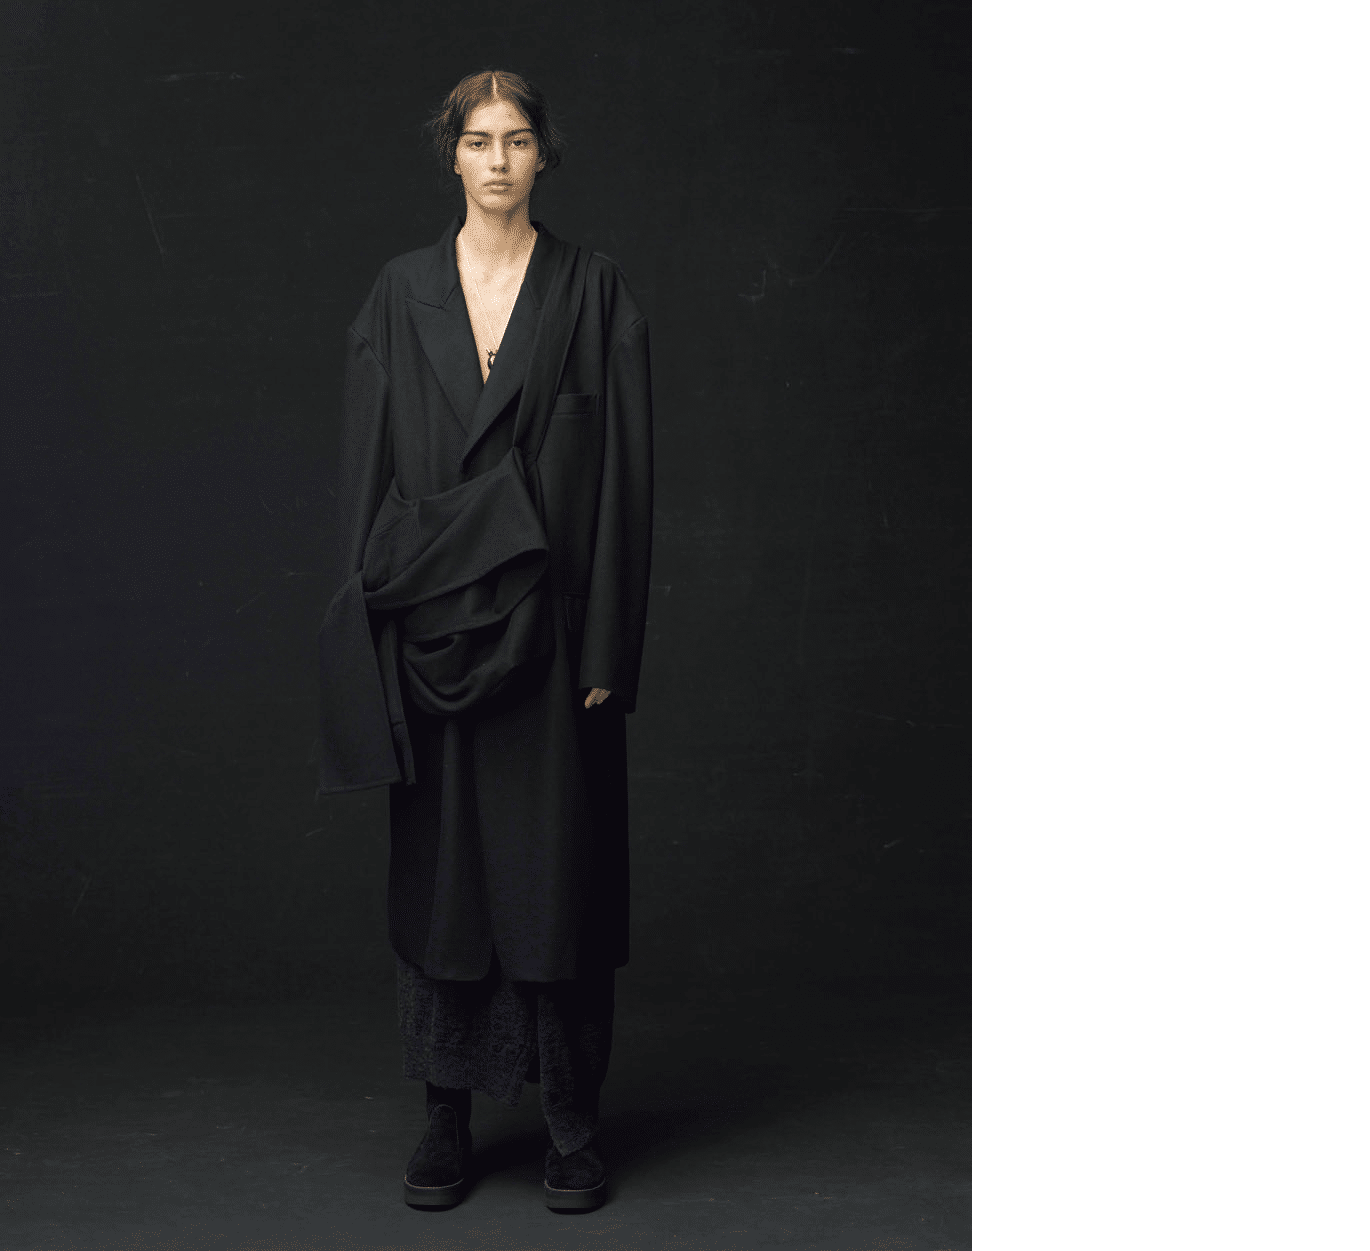 Yohji Yamamoto chose JD to be its first online platform for cooperation, and launched its first online official flagship store in China on JD.